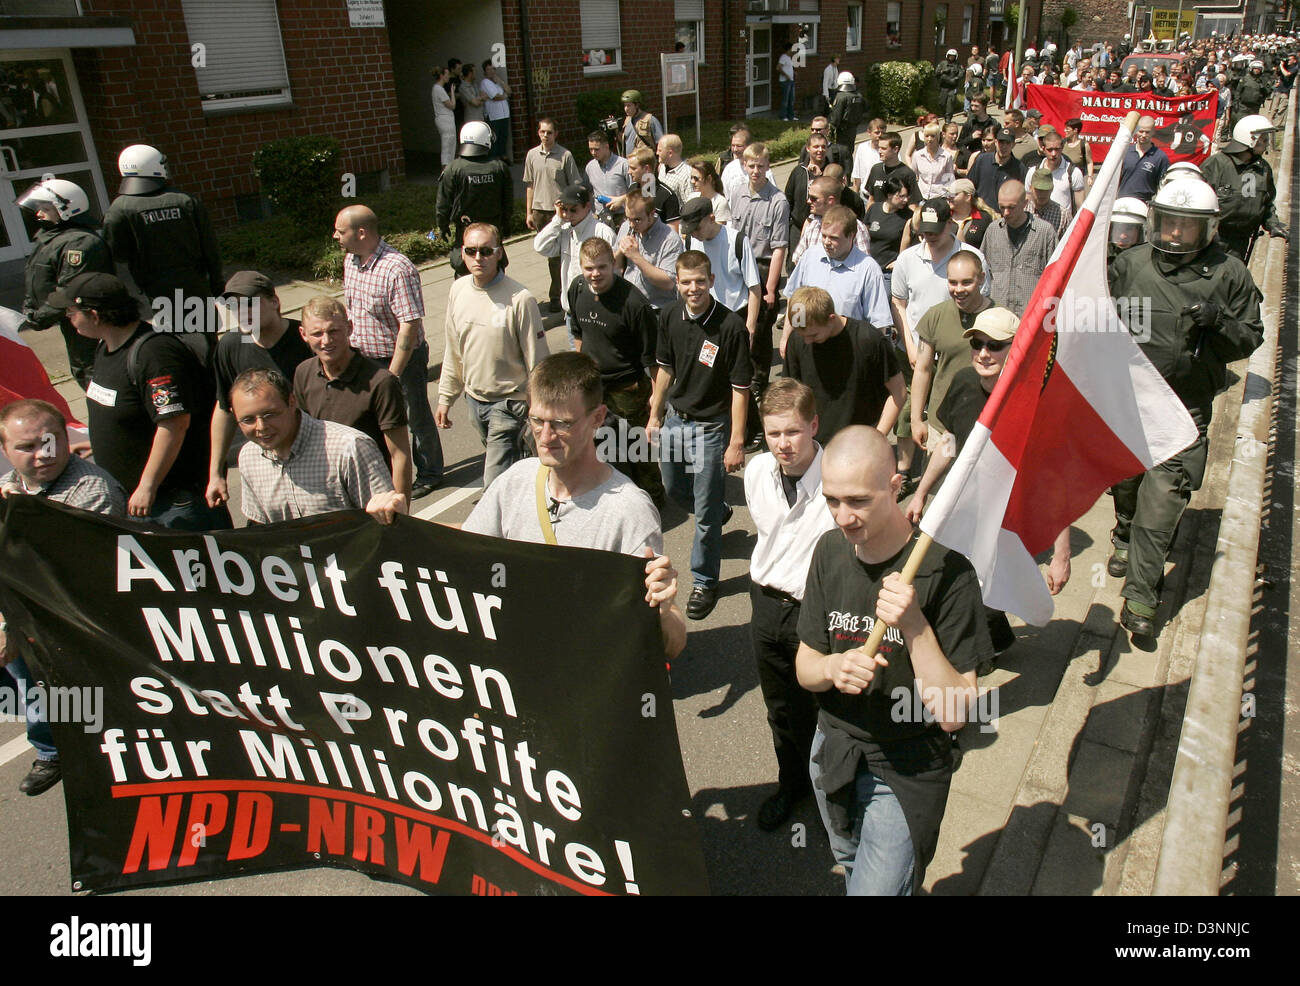 Neo-Nazis march with their flags in downtown Gelsenkirchen, Germany, Saturday, 10 June 2006. The rally of circa 200 rightist-extremist party NPD supporters was permitted by the Federal Constitutional Court only Friday, 9 June after the higher administrative court Muenster had prohibited it. The judges in Muenster reasoned their decision with a massive breach of the public security. Stock Photo